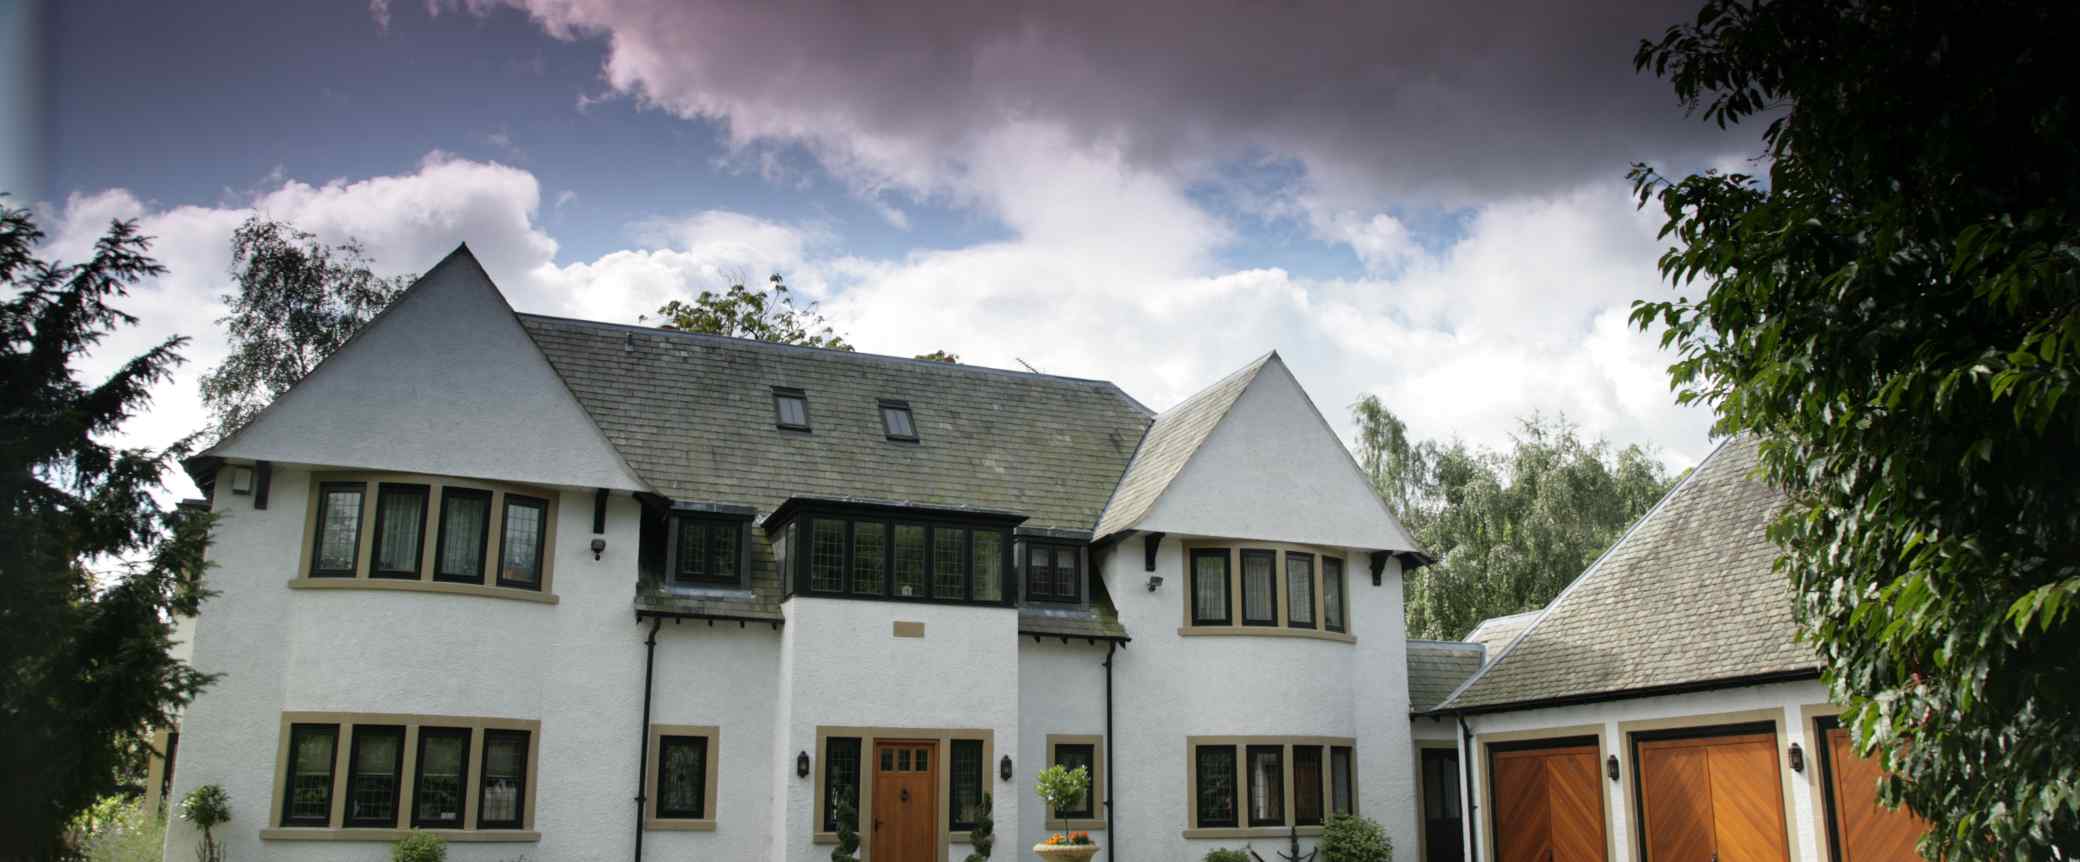 Replacement Dwelling - Curzon Park, Chester Cheshire